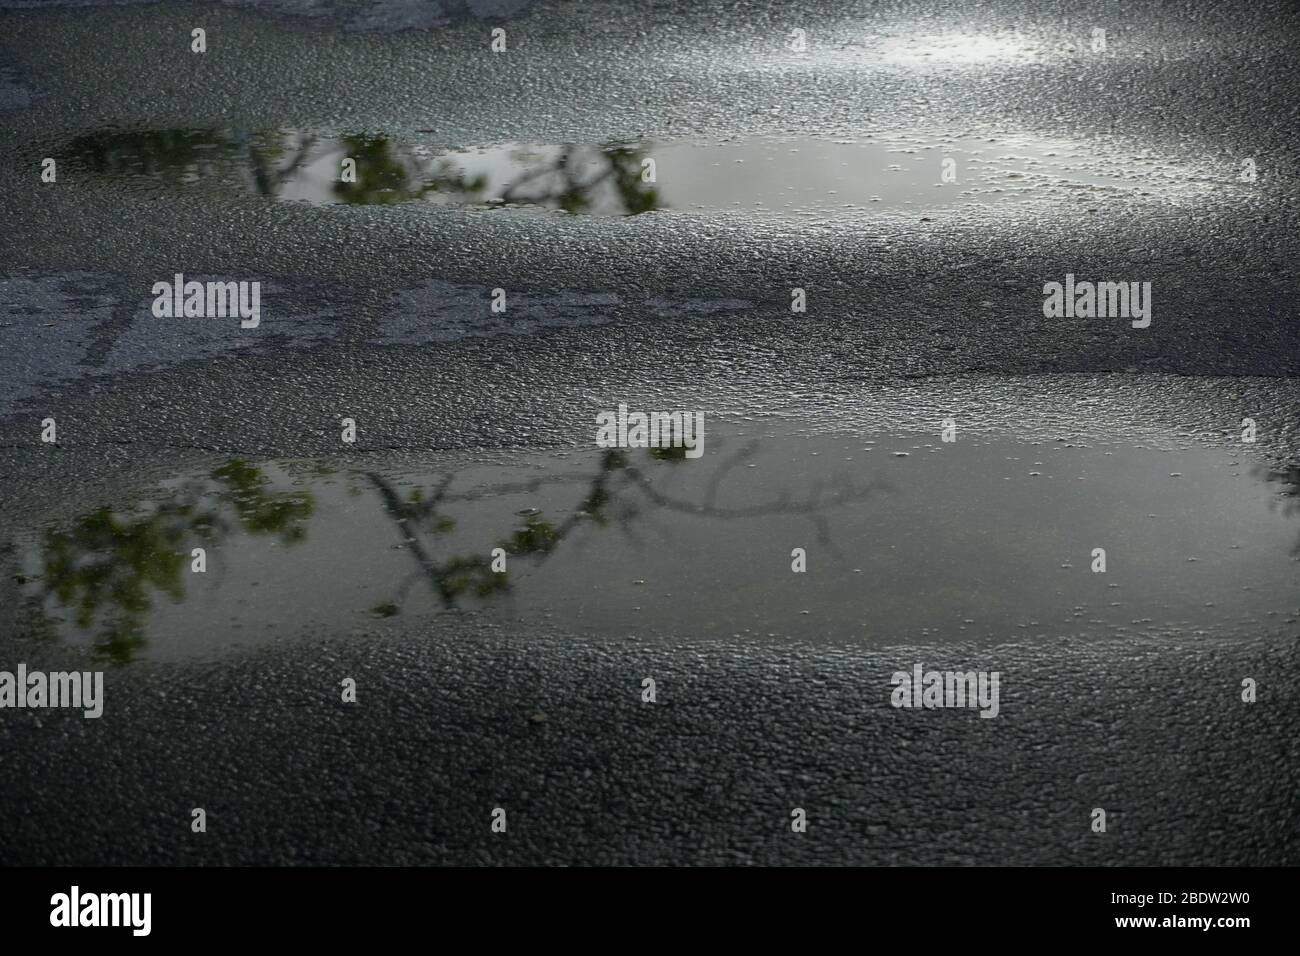 Several oval puddles that formed on the uneven surface of an asphalt path on a rainy day,reflecting sky and tree branches overhead create calm scene Stock Photo